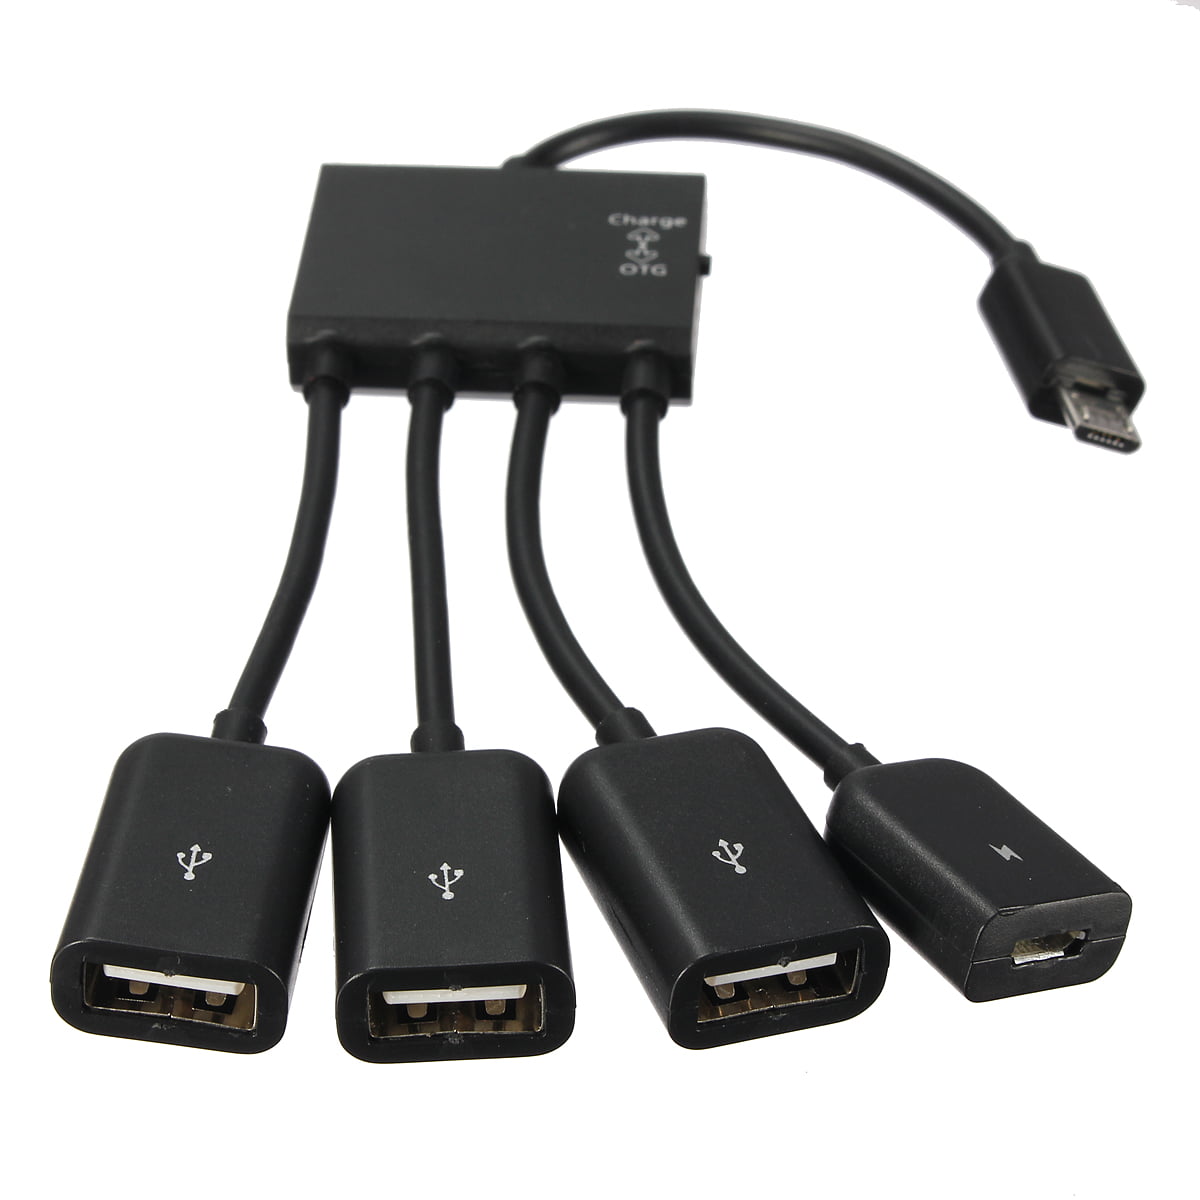 Tek Styz PRO OTG Power Cable Works for Lenovo Tab M8 HD with Power Connect Any Compatible USB Accessory with MicroUSB Cable! 